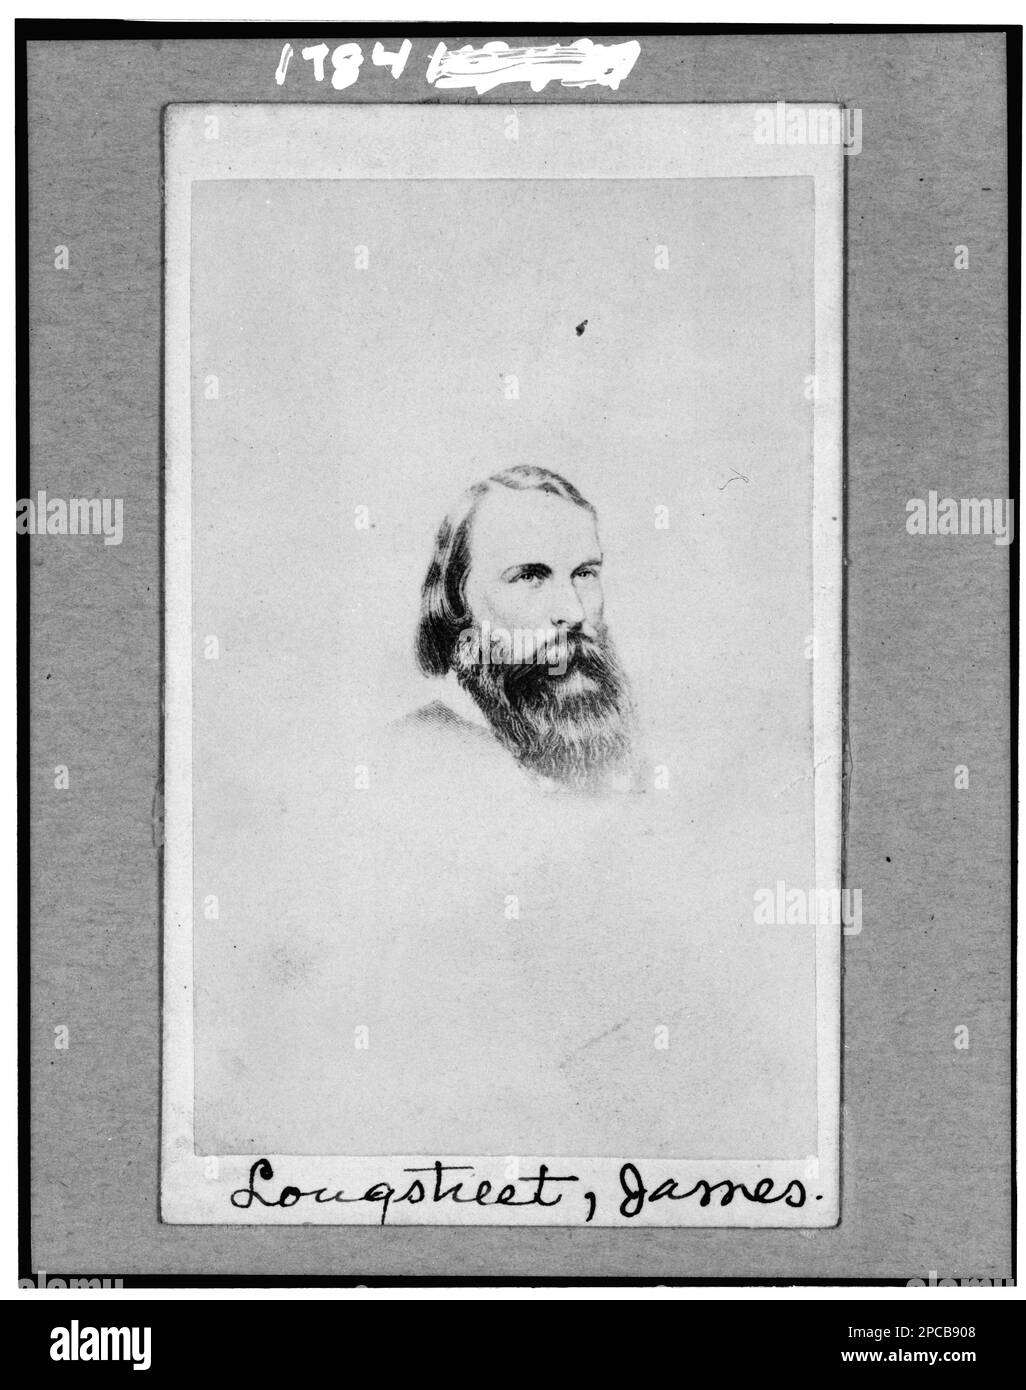 General James Longstreet, C.S.A., head-and-shoulders portrait, facing slightly right. Title devised by Library staff, Reference copy in BIOG FILE. Longstreet, James, 1821-1904, Military service, Military officers, Confederate, 1860-1870, United States, History, Civil War, 1861-1865, Military personnel, Confederate. Stock Photo